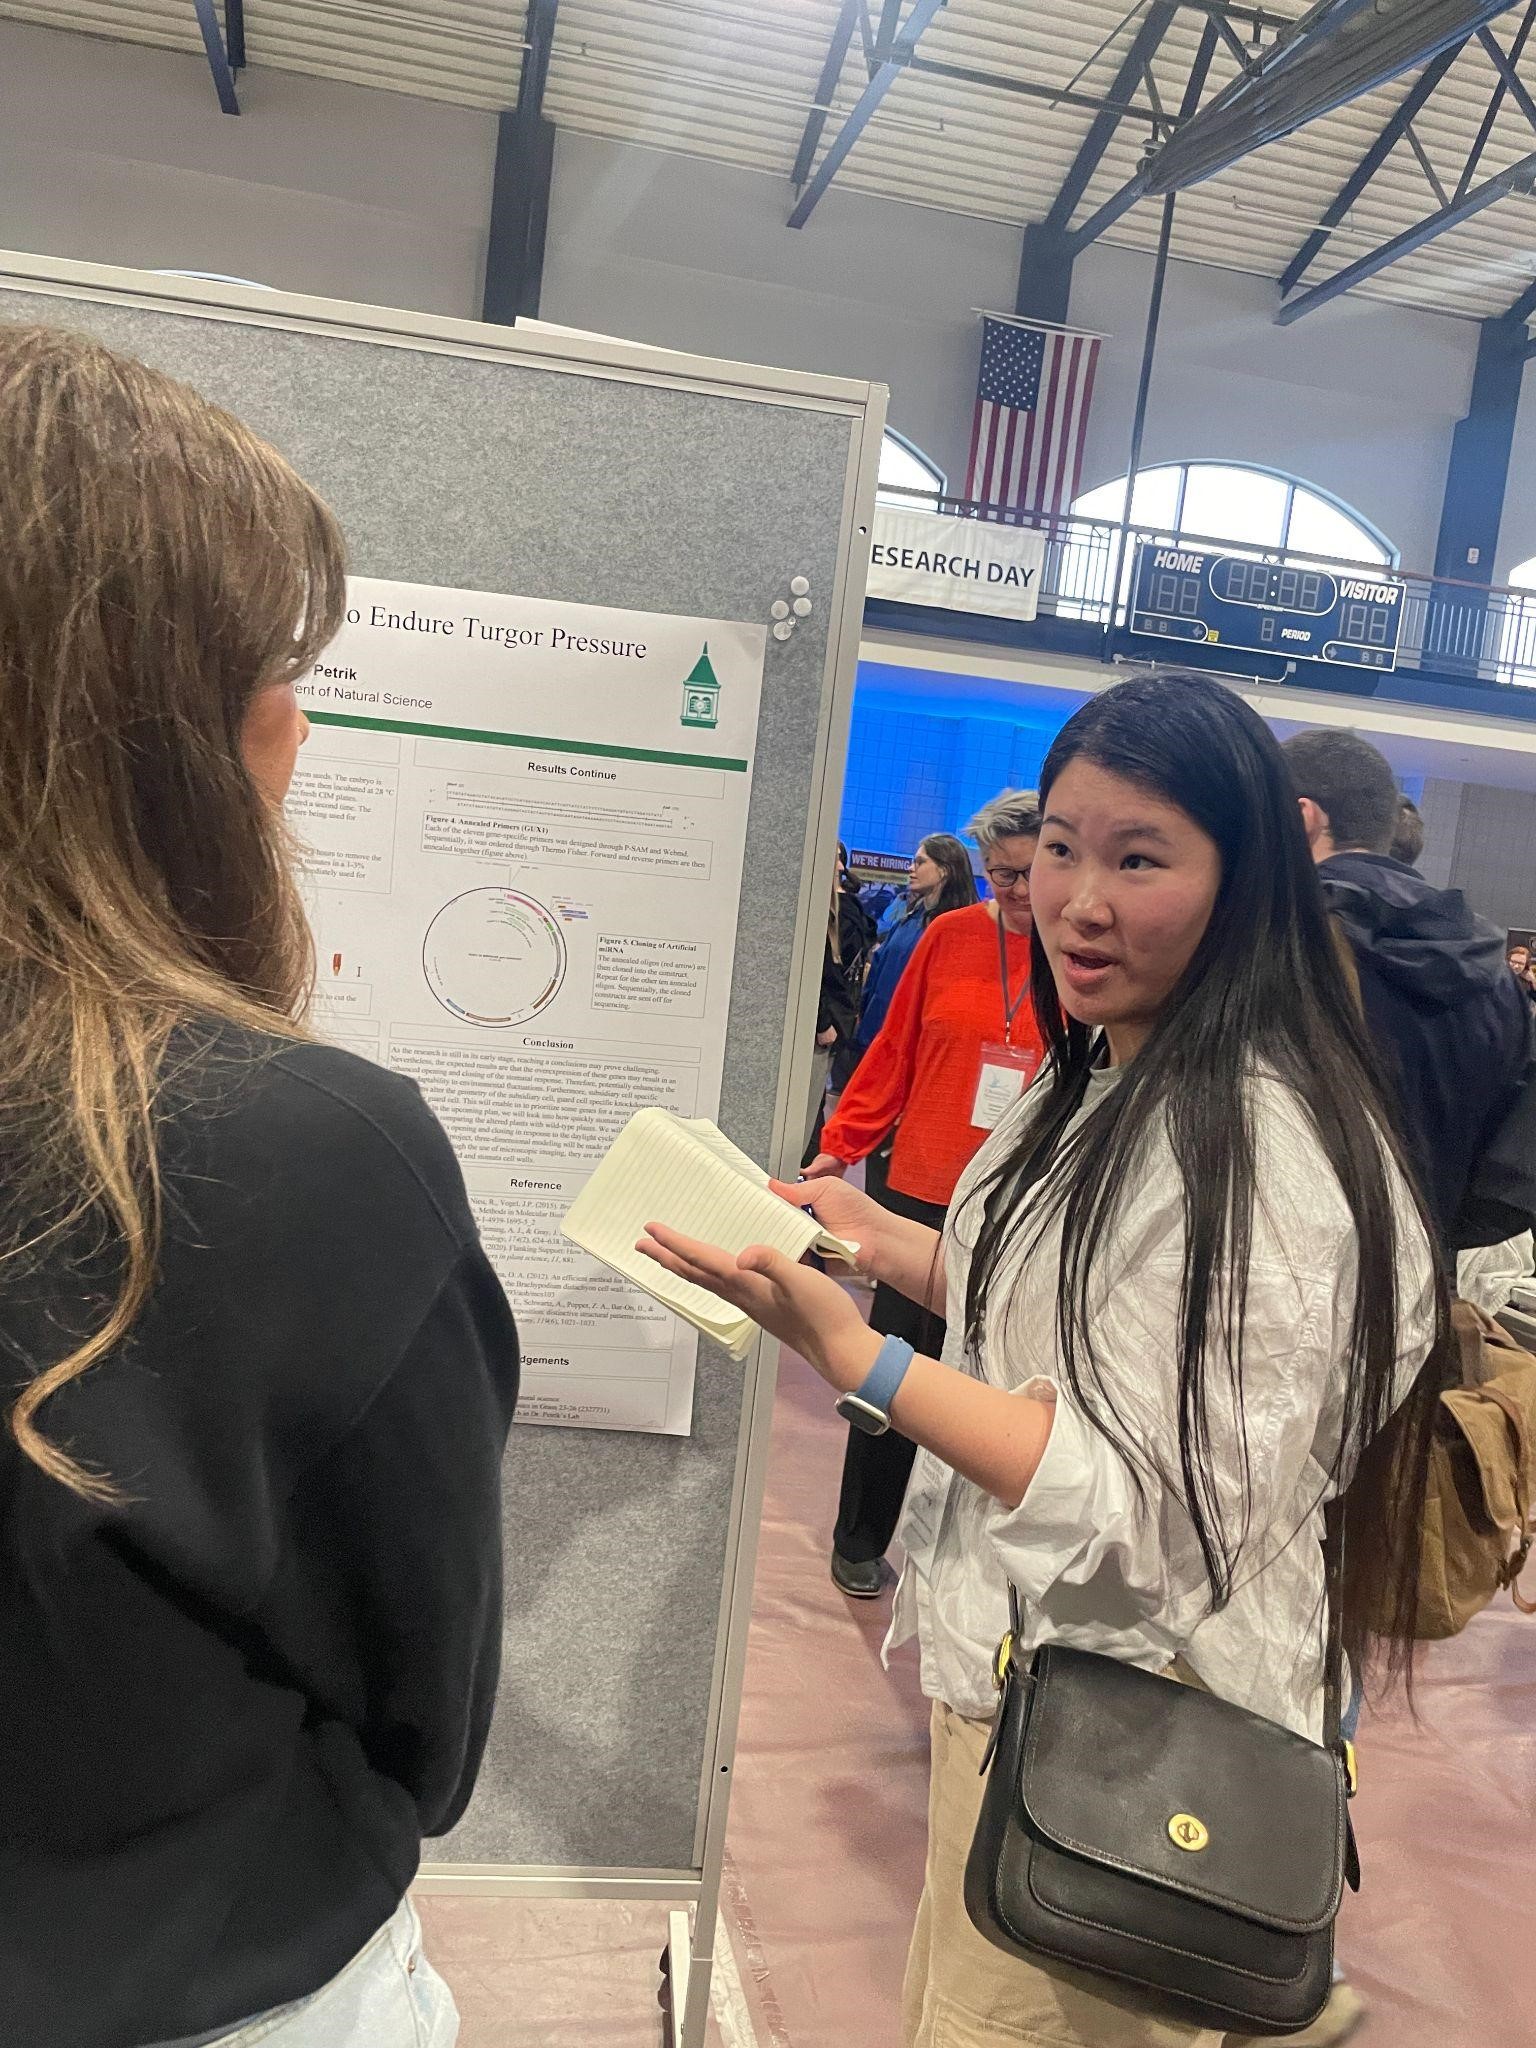 Qimeng Li presenting her poster at Oklahoma Research Day in Edmond OK on March 8, 2024.